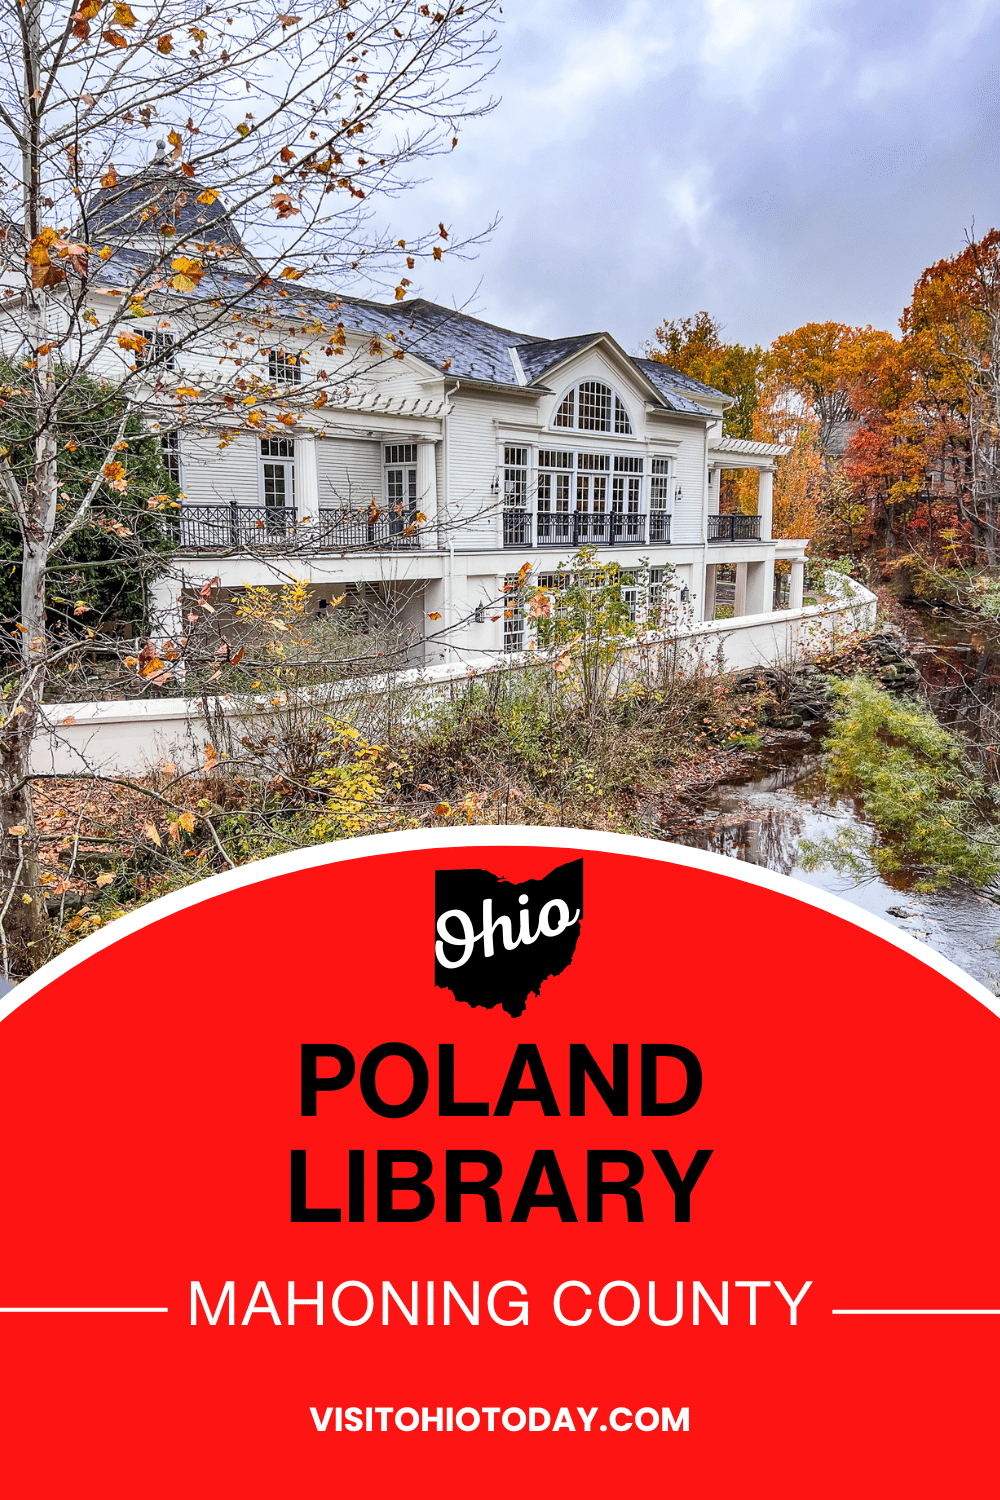 Discover the magic of Poland Library, the hub of literary and architectural wonder in Youngstown and Mahoning County. Tucked away in the picturesque village of Poland, this public library is a sight to behold, thanks to its exquisite architecture. And with a charming bookstore and coffee shop onsite, it's the perfect destination for bookworms and coffee lovers alike.